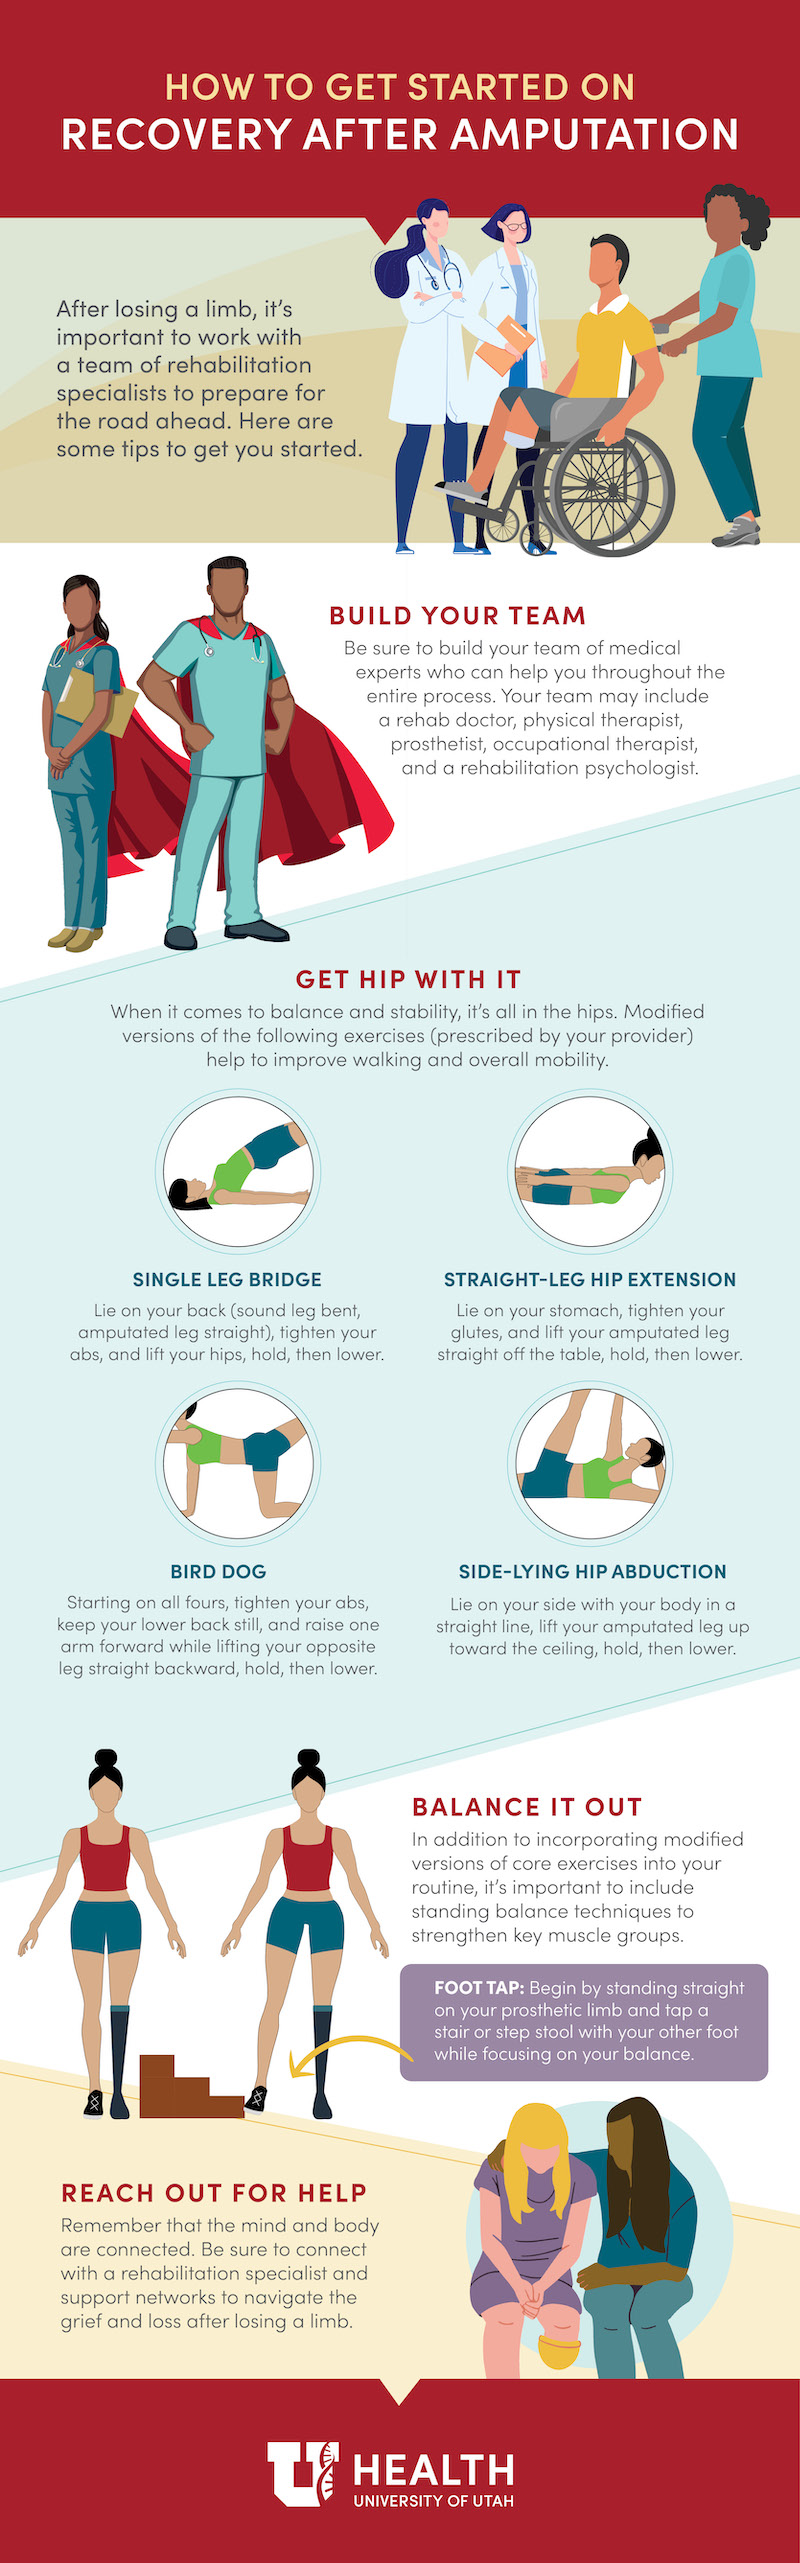 Infographic explains how to get started on recovery after an amputation.